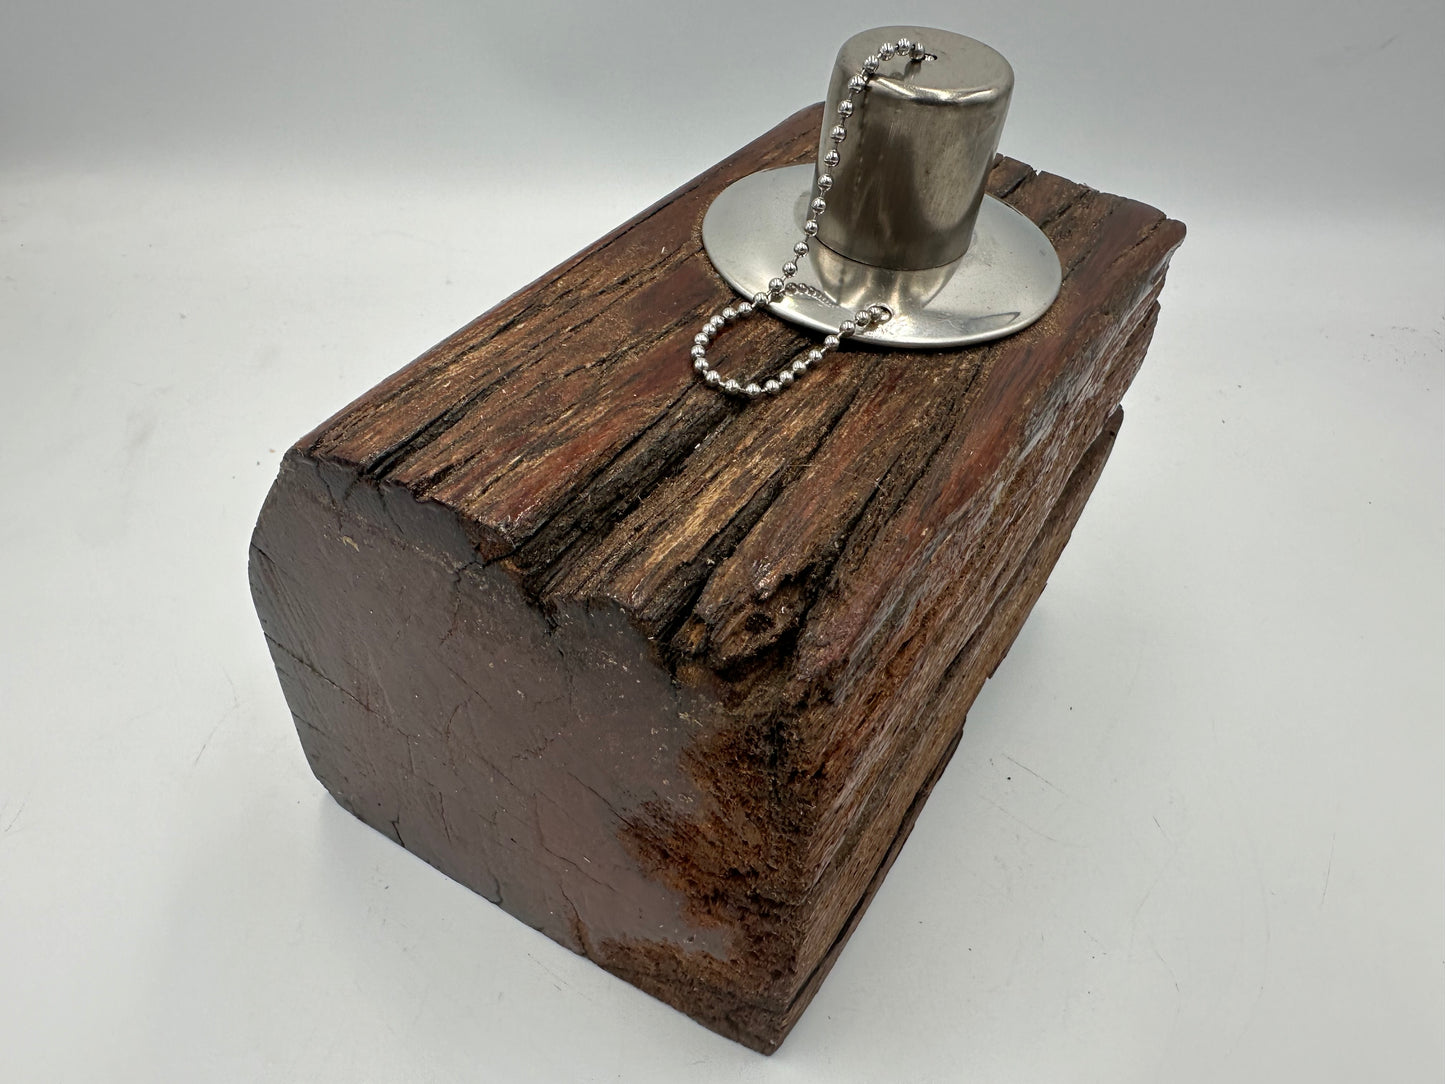 Recycled Wooden Oil Burner Small 54